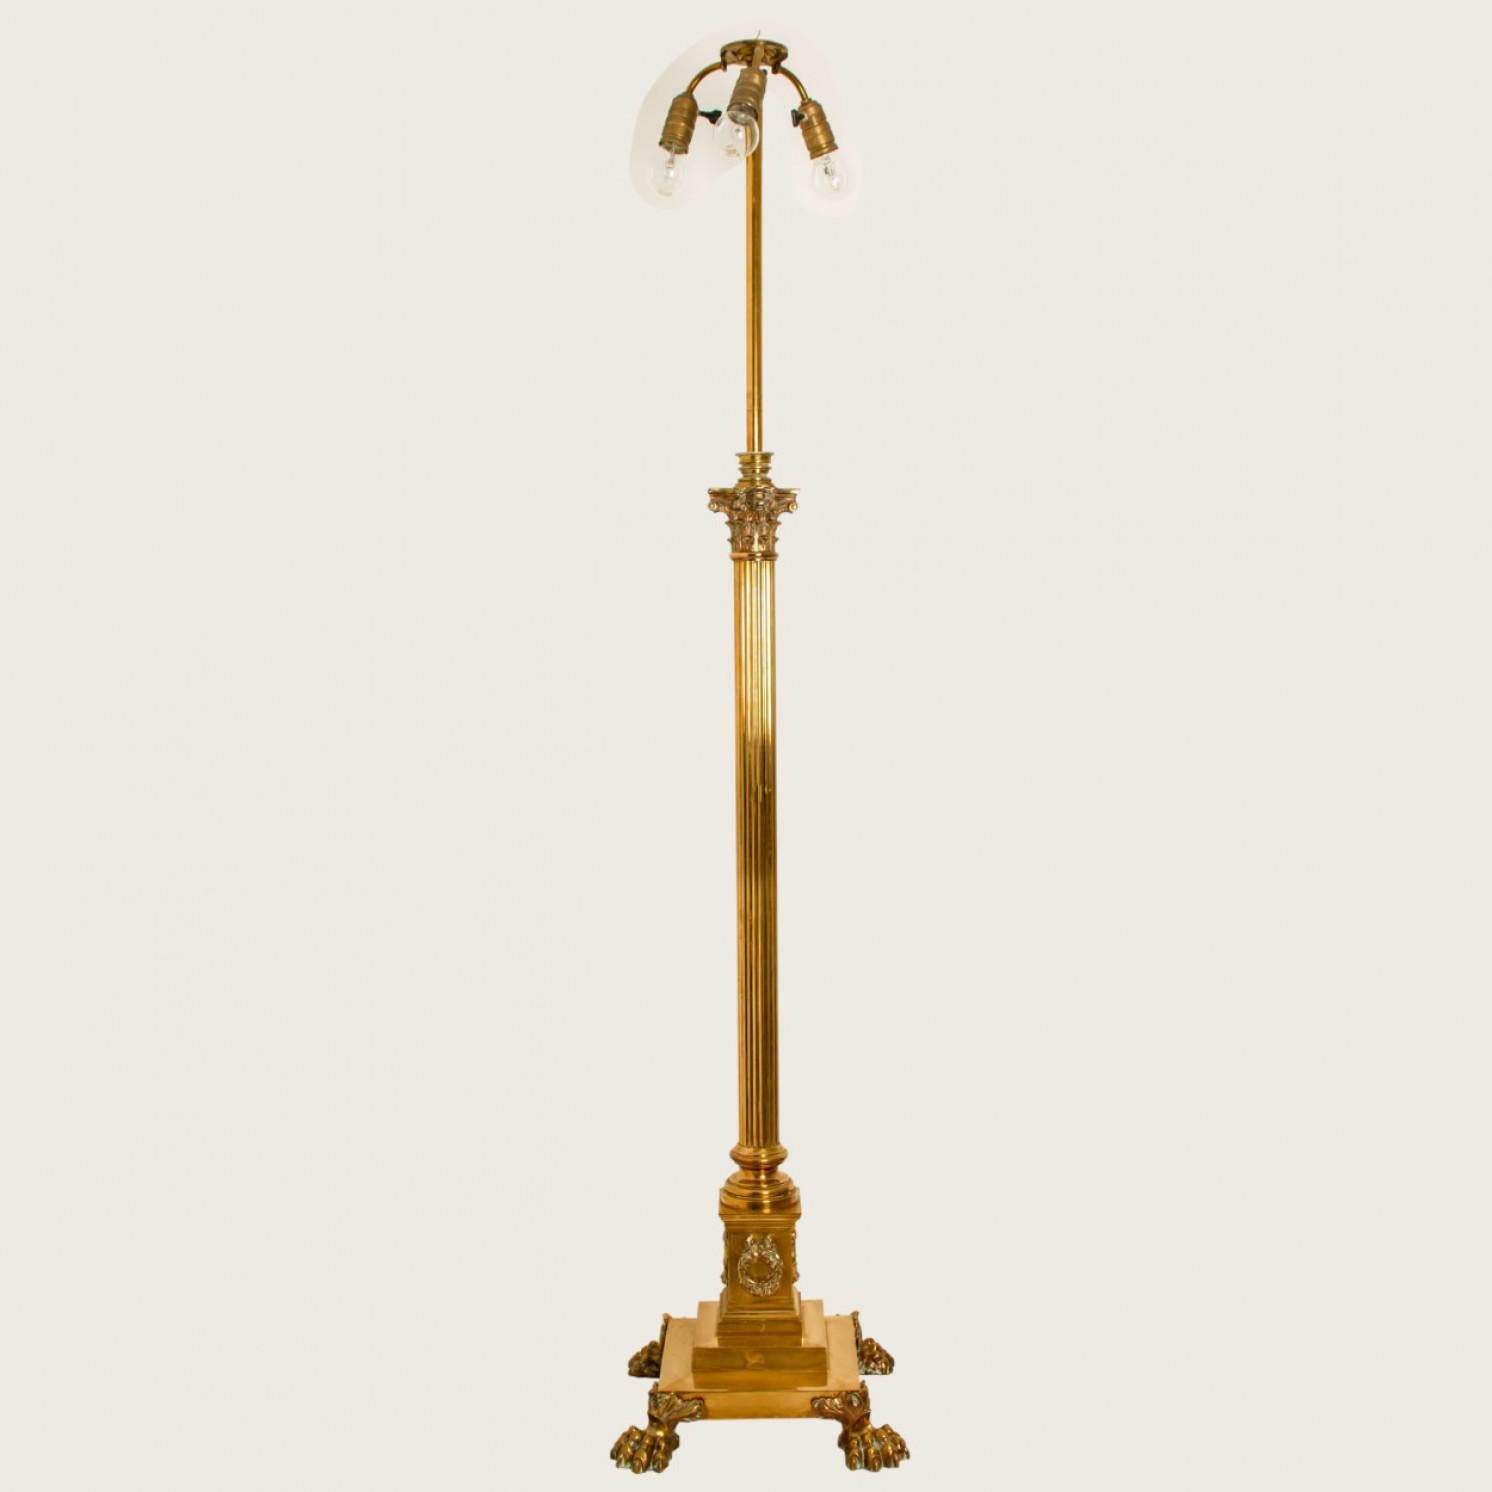 Antique Corinthian Column Brass Floor Lamp with Fringed Lampshade, England, 1890 For Sale 6